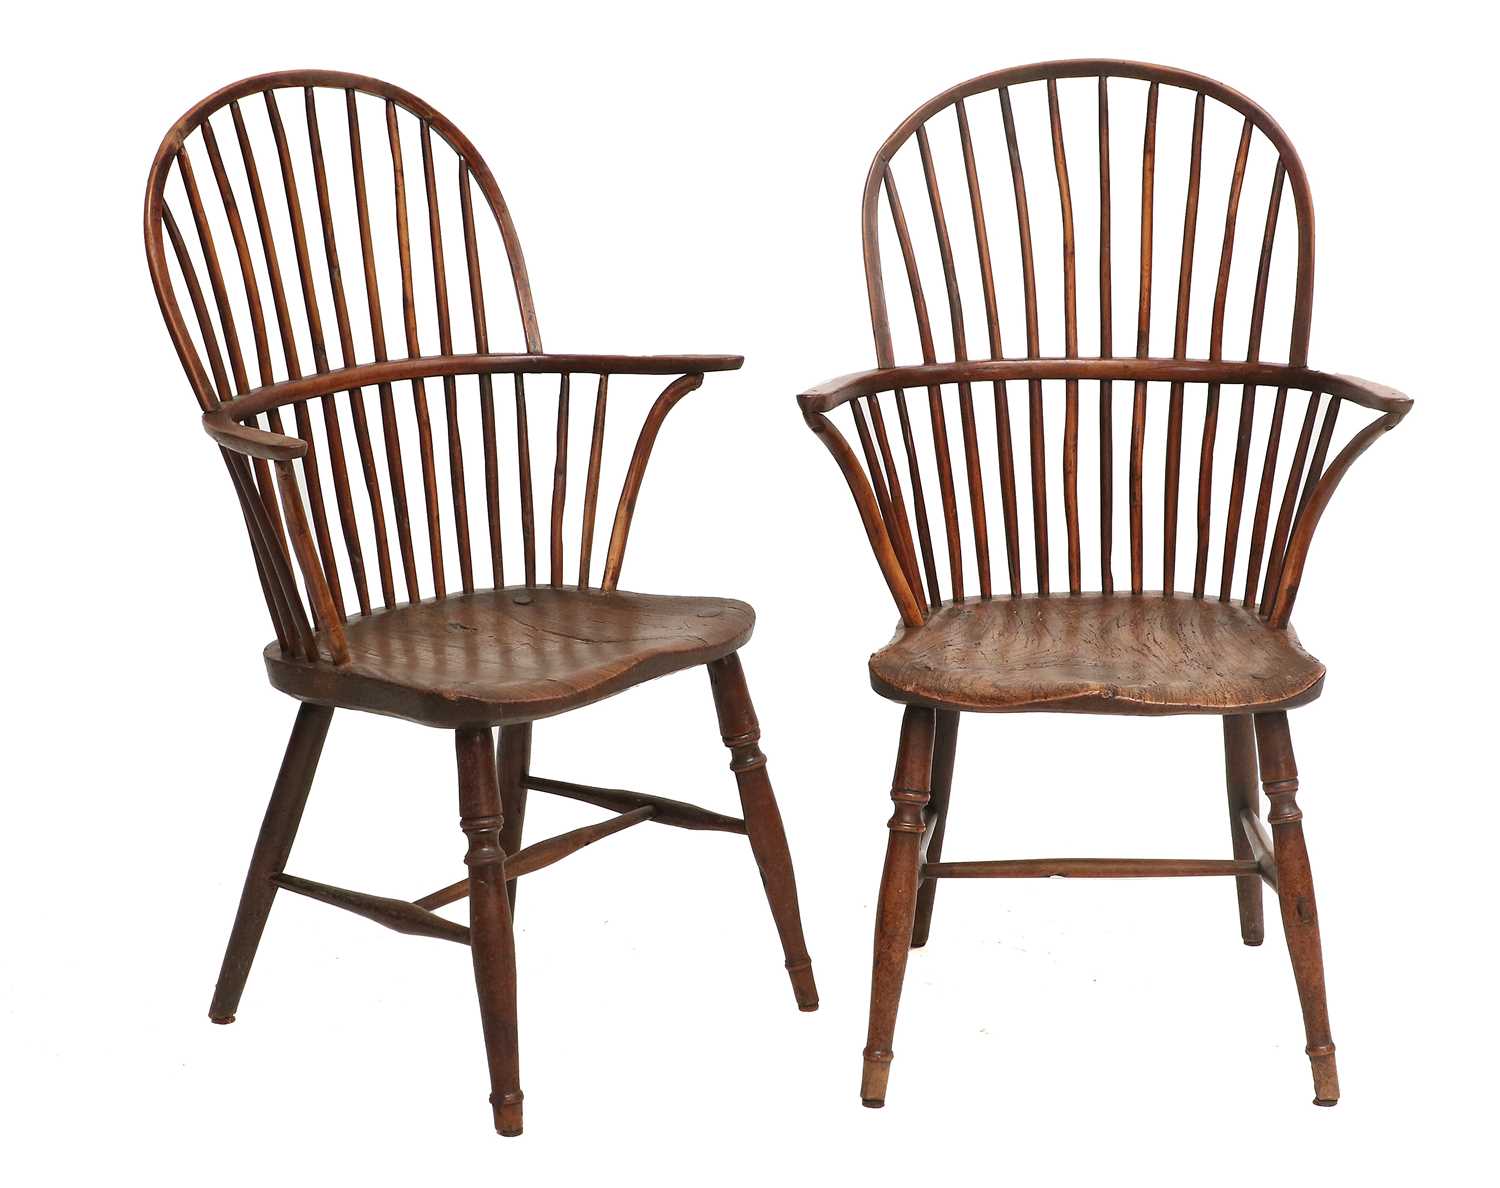 A Pair of Mid 19th Century Yew Windsor Armchairs, with double spindle back supports and curved